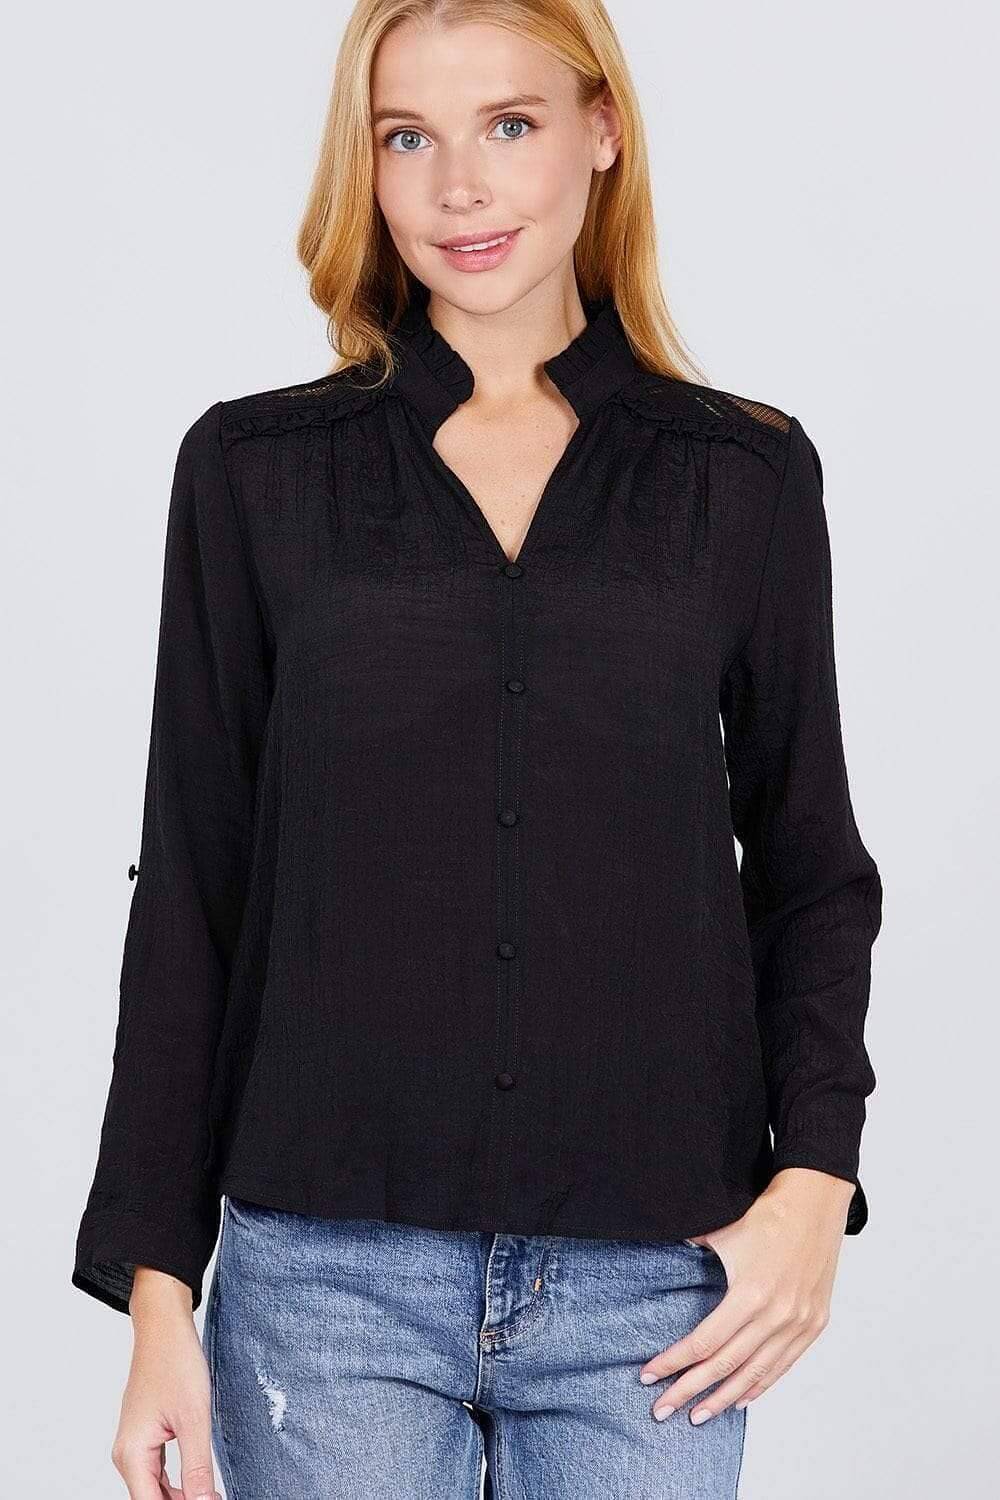 Black Long Sleeve V-Neck Button Down Top - Shopping Therapy, LLC Top